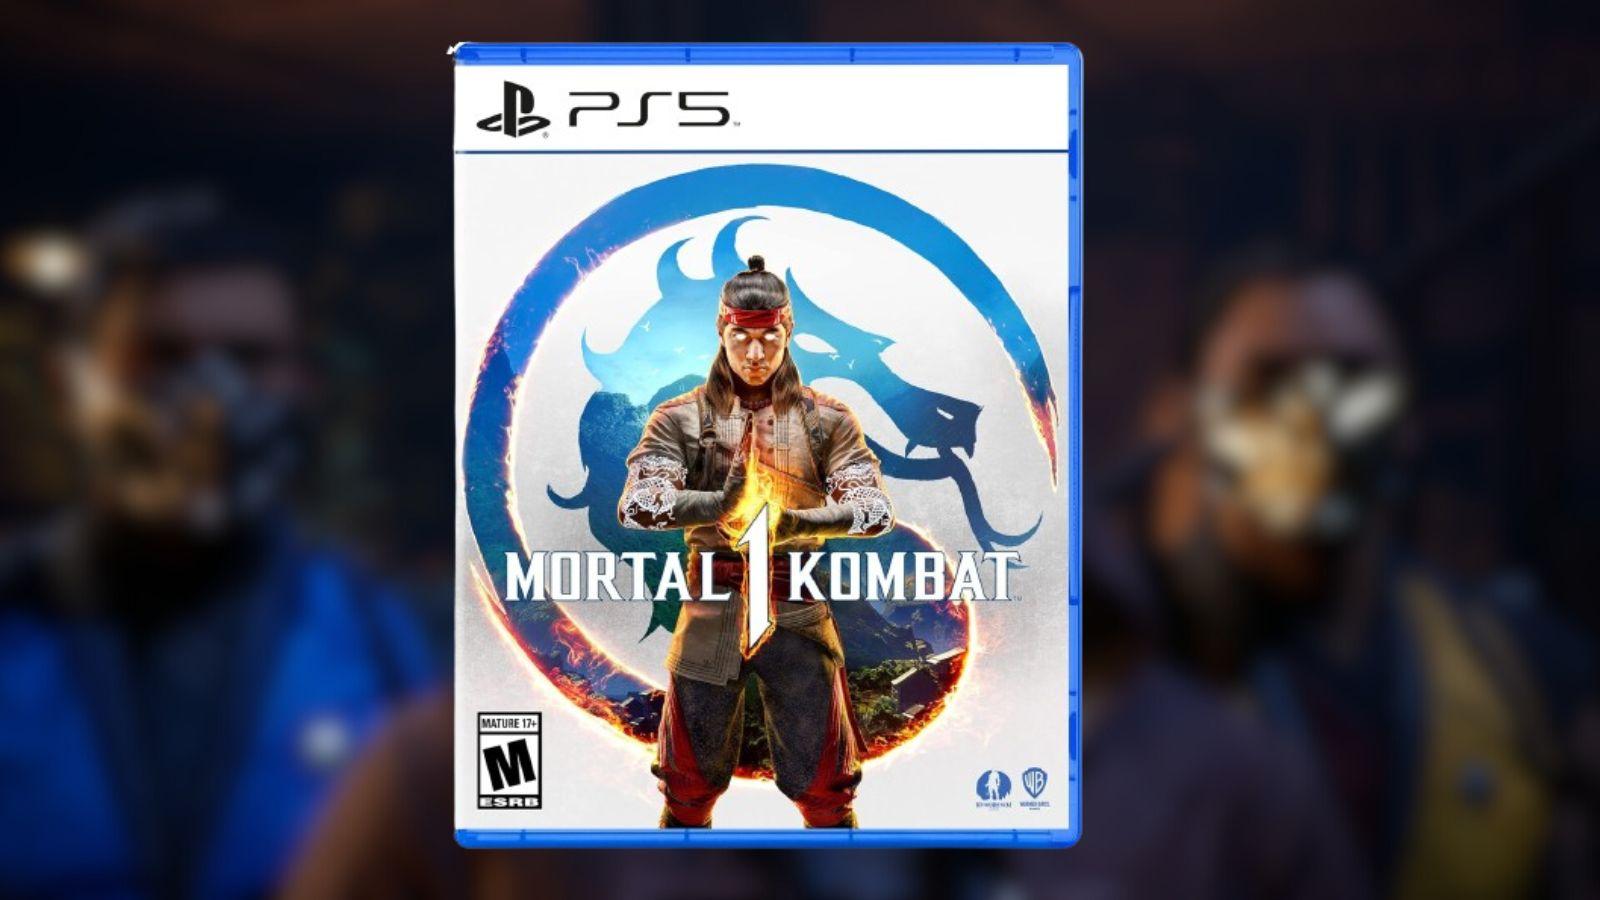 New Mortal Kombat 1 Update Out Now on Xbox, Switch, PS5 and PC - News